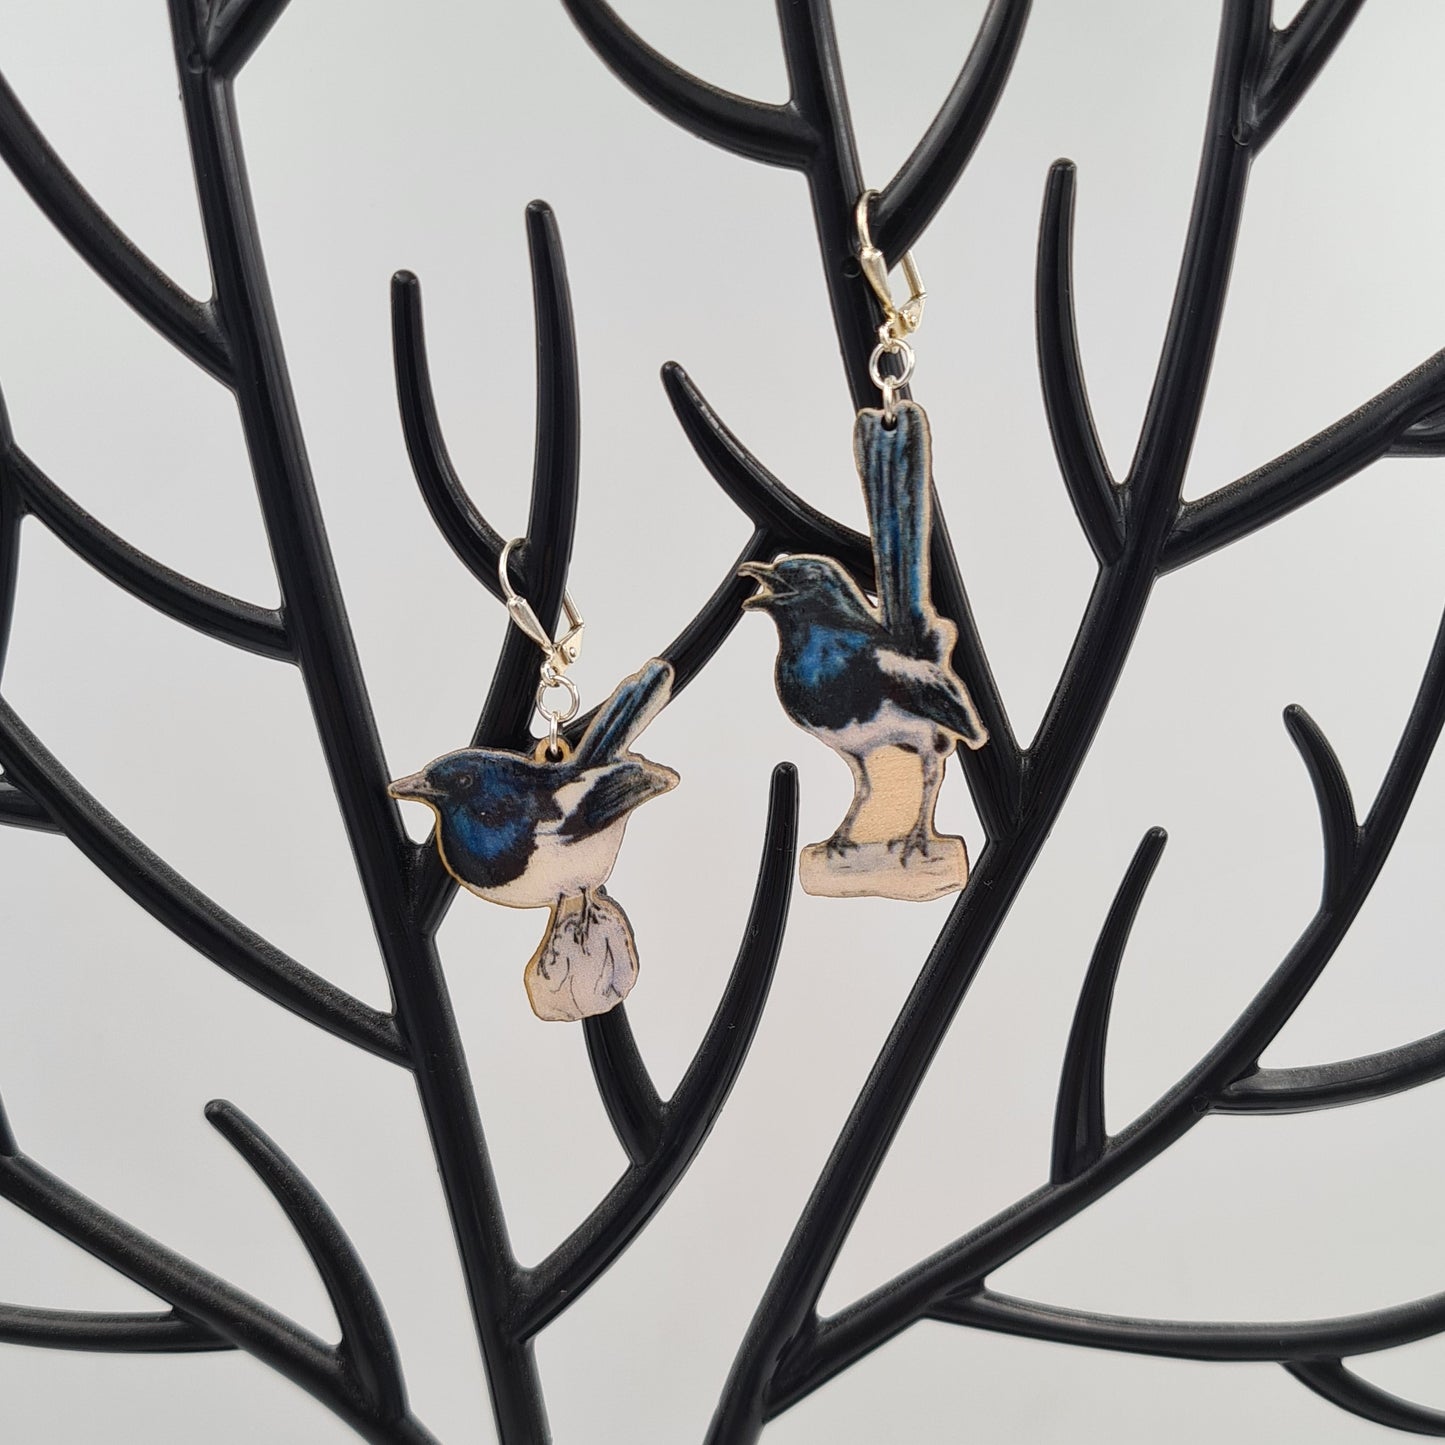 ''Two for Joy'' Magpie Earrings